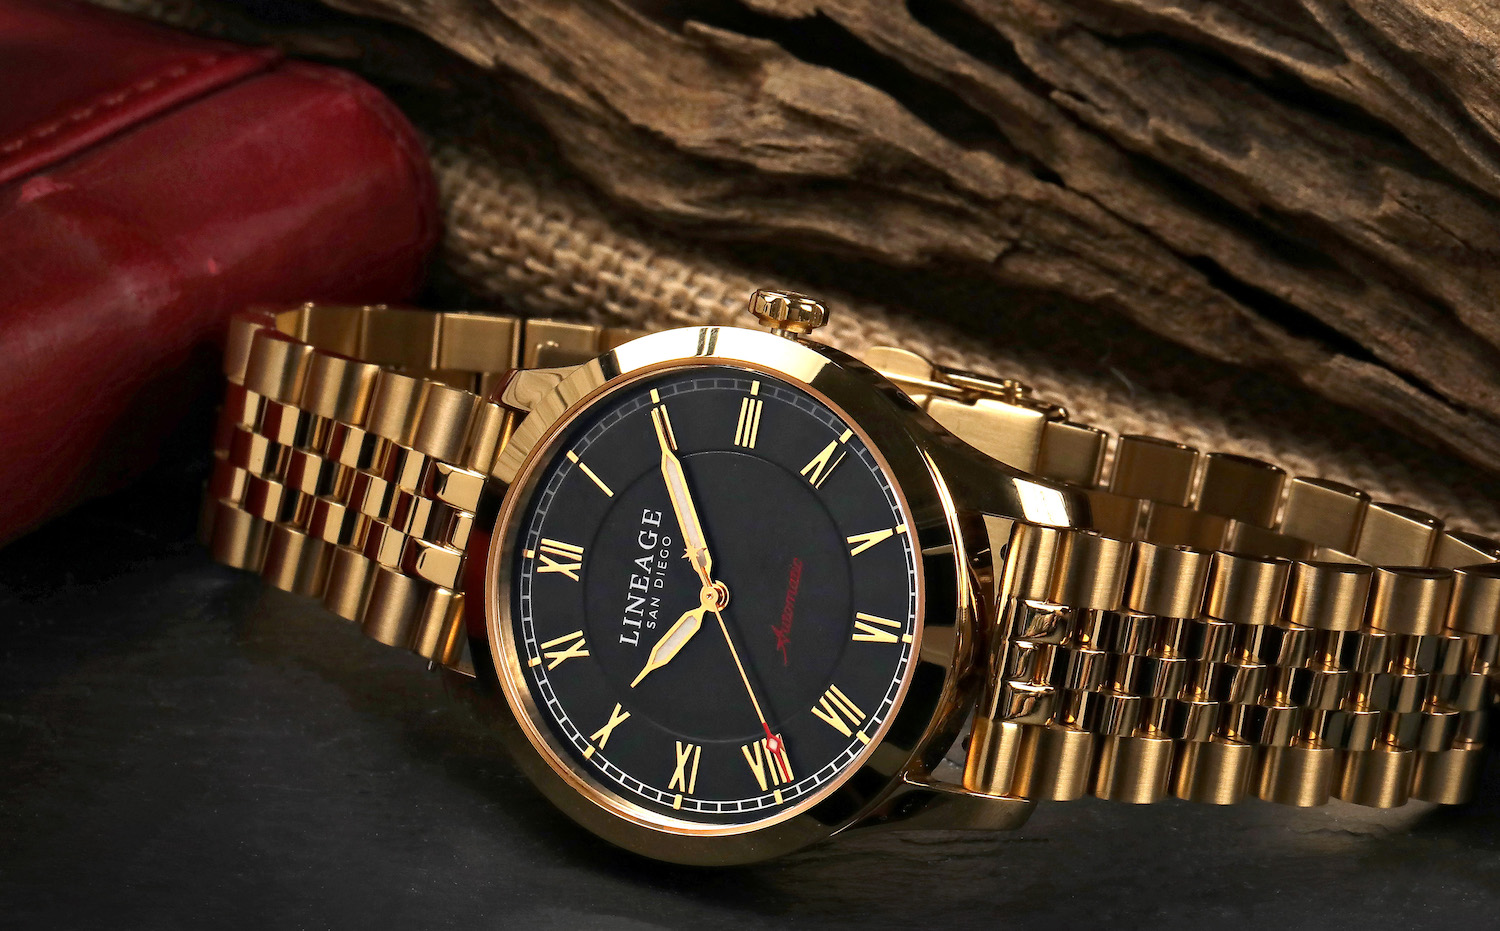 Gold watch produced by San Diego company Lineage Watch Co.